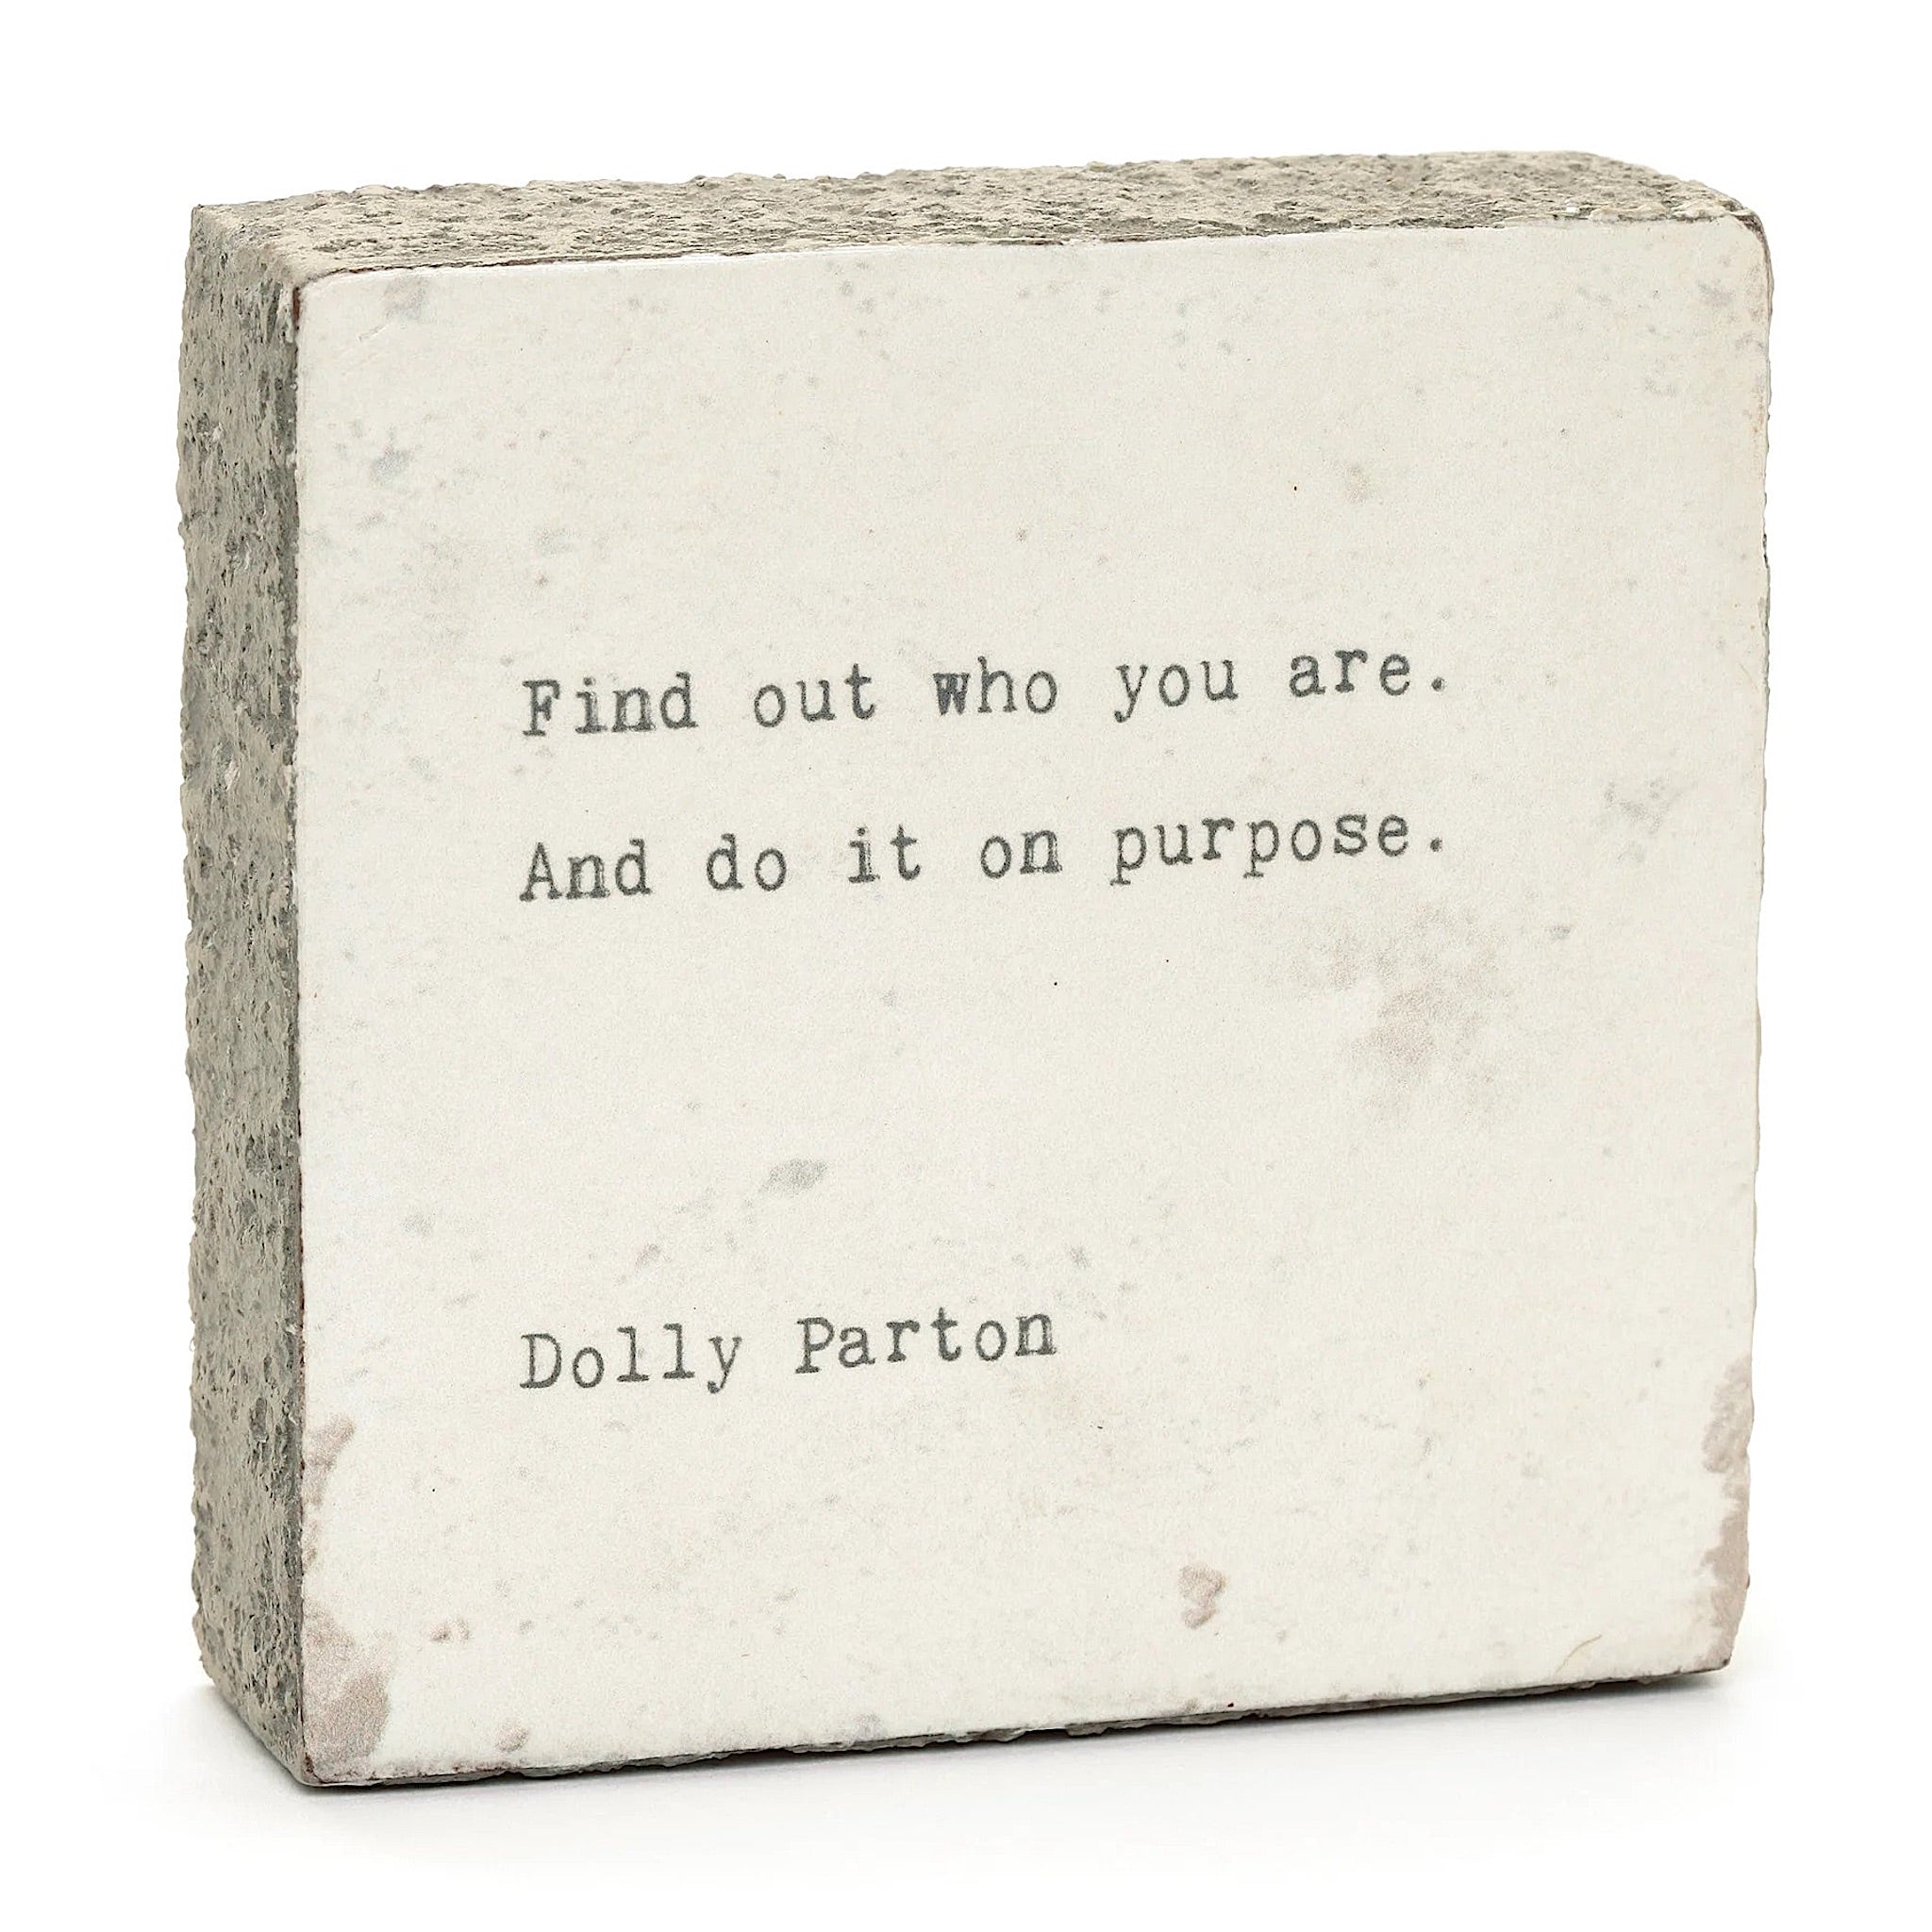 Find out who you are and do it on purpose